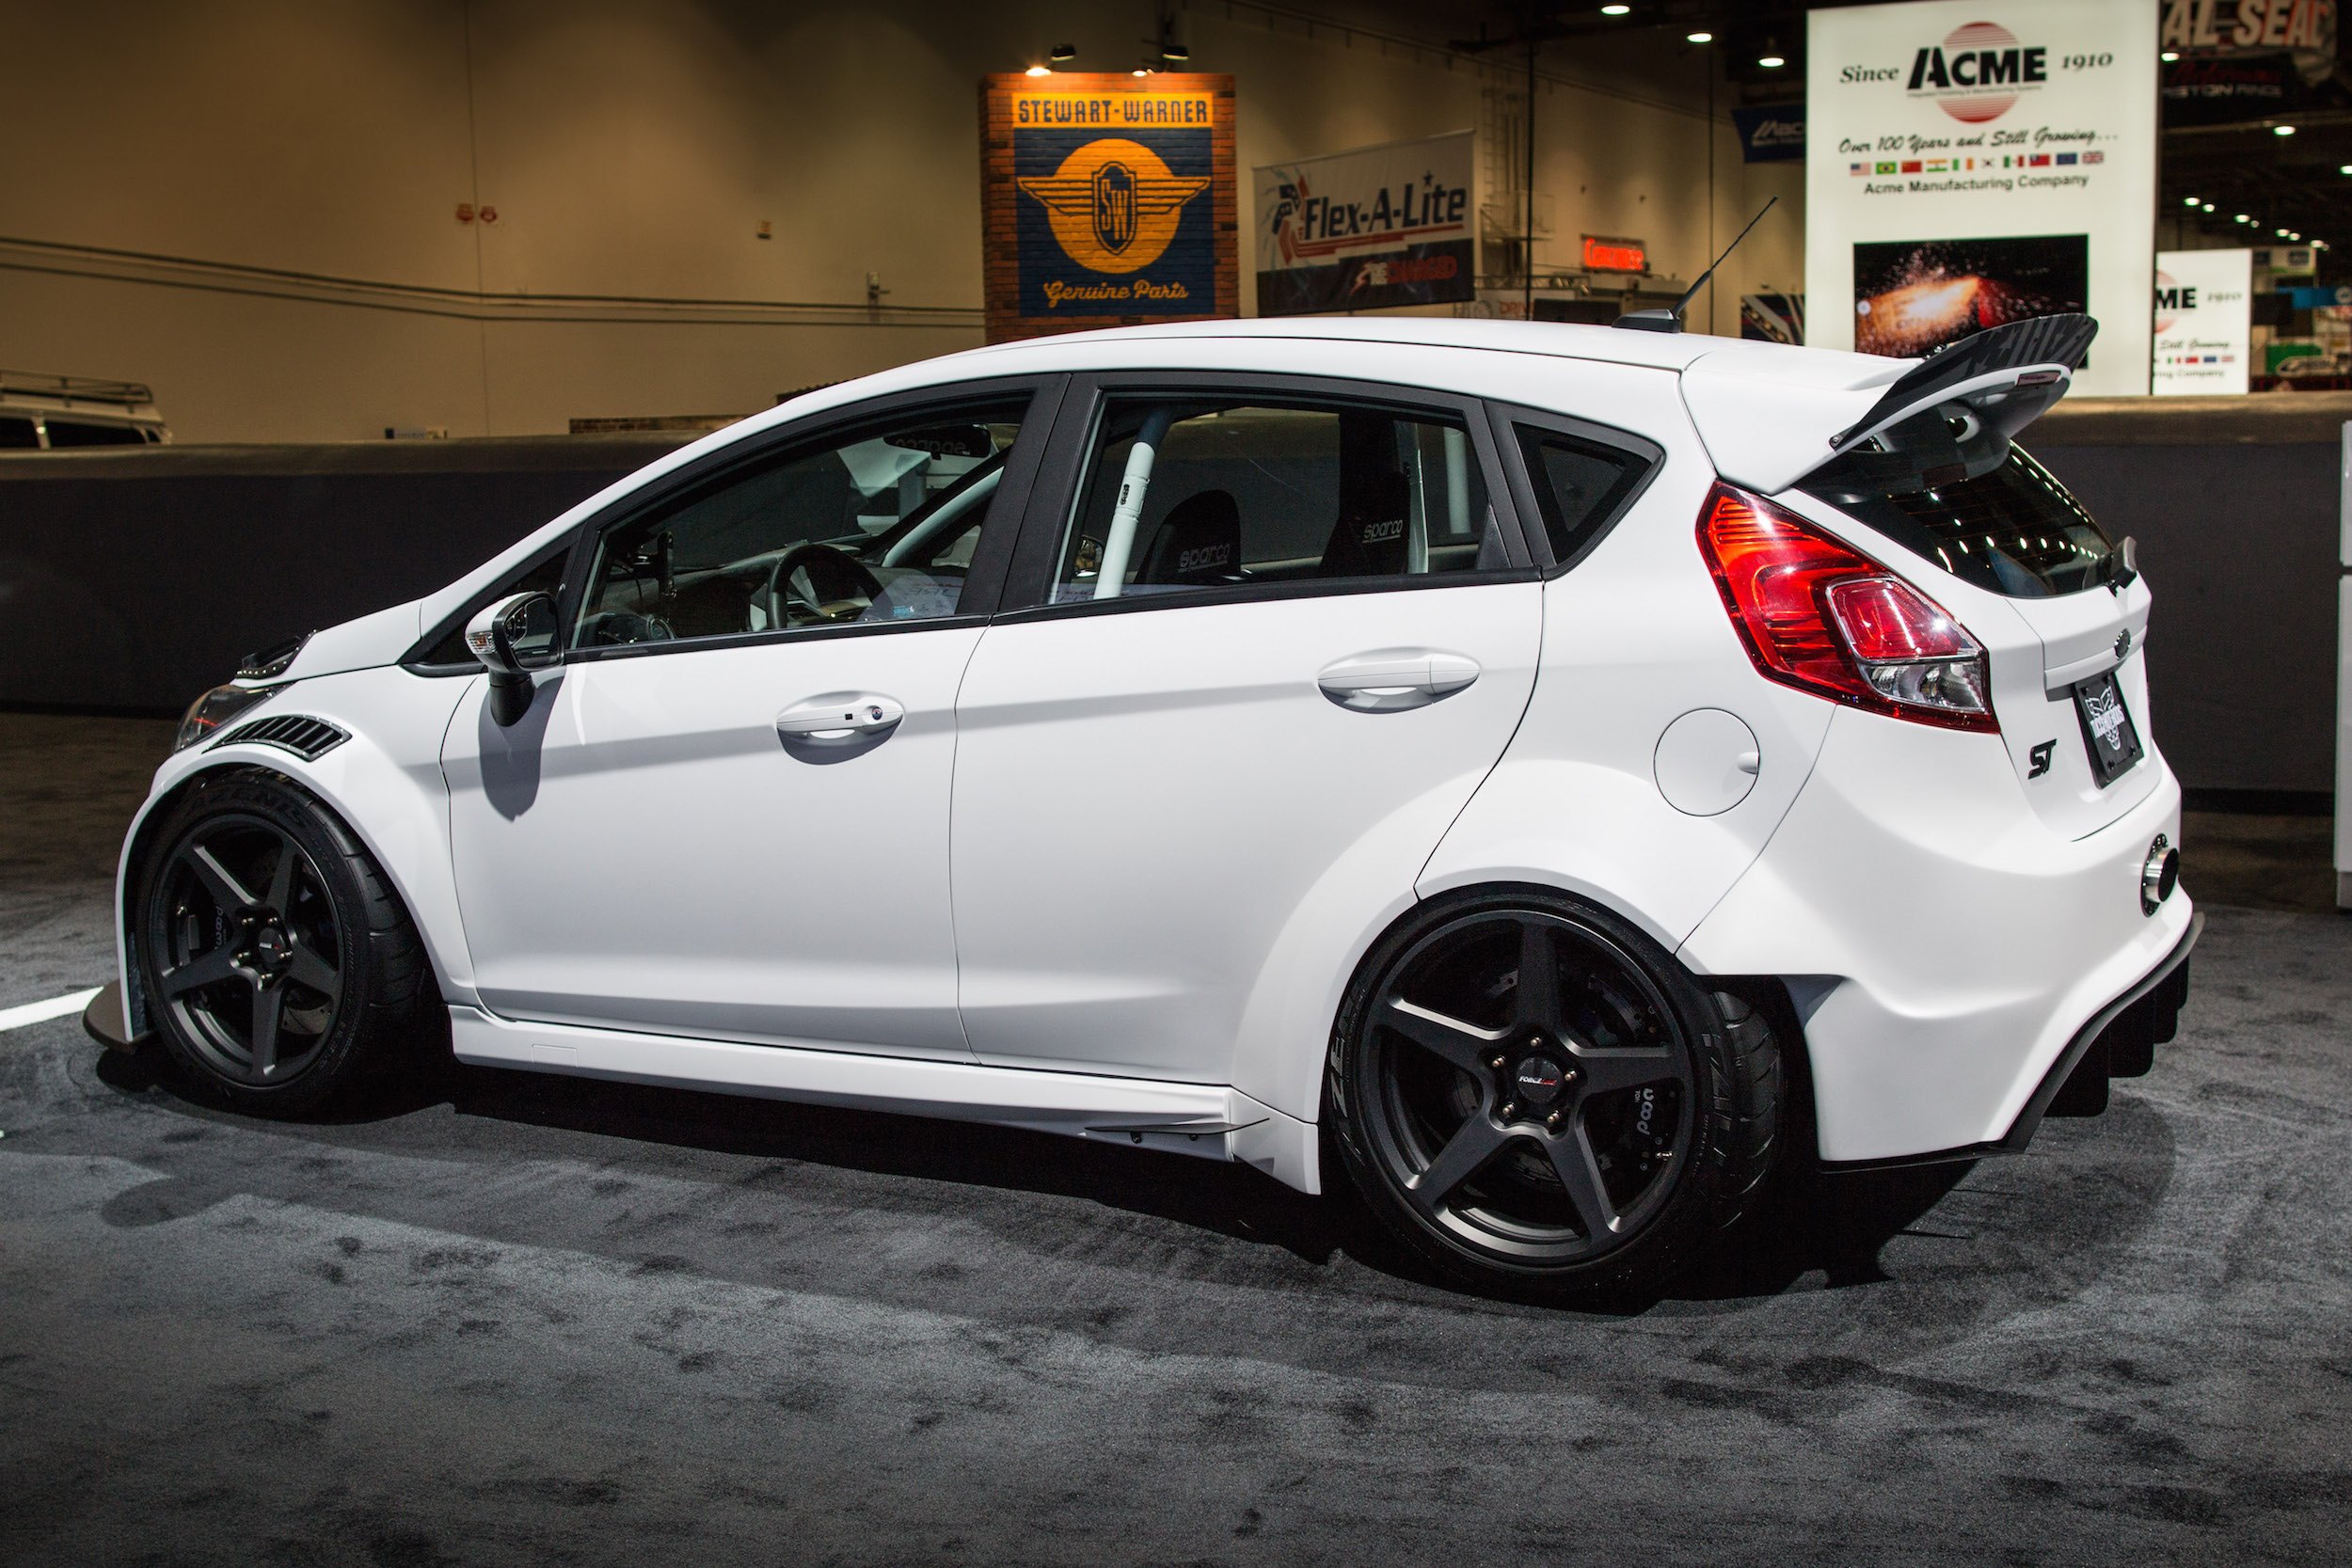 Large Roofline Spoiler with Light on White Ford Fiesta - Photo by Forgeline Motorsports